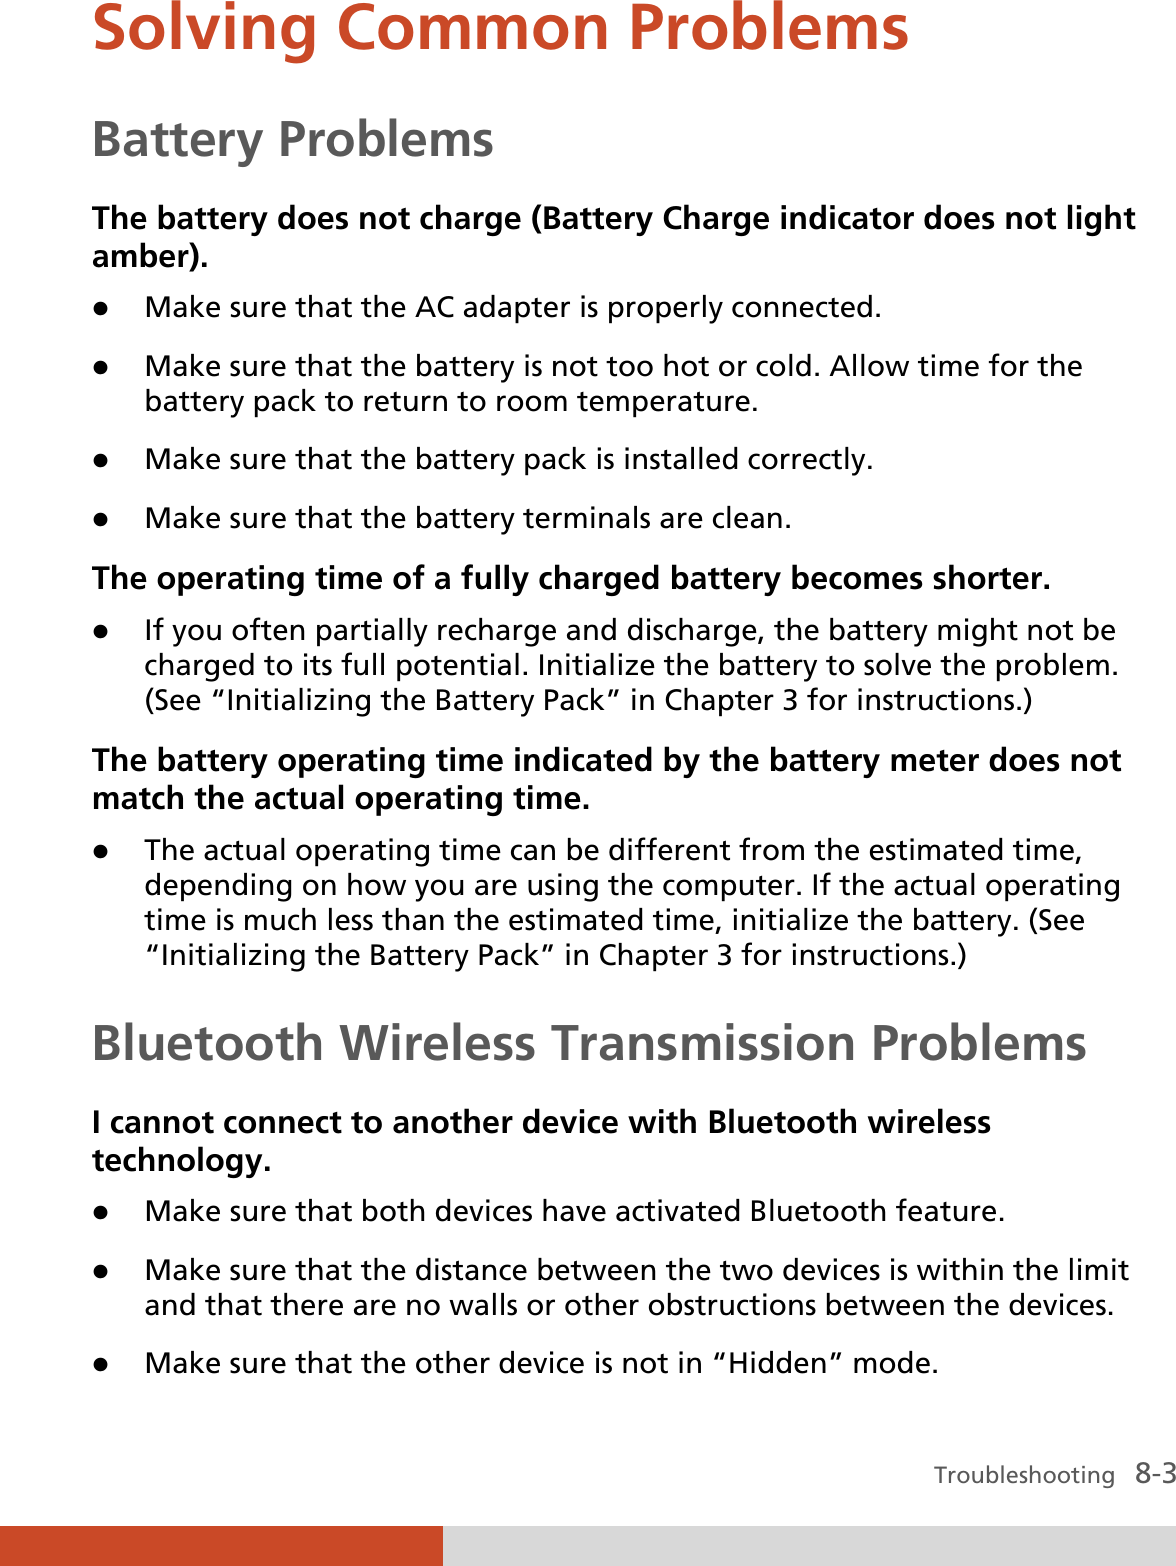  Troubleshooting   8-3 Solving Common Problems Battery Problems The battery does not charge (Battery Charge indicator does not light amber). z Make sure that the AC adapter is properly connected. z Make sure that the battery is not too hot or cold. Allow time for the battery pack to return to room temperature. z Make sure that the battery pack is installed correctly. z Make sure that the battery terminals are clean. The operating time of a fully charged battery becomes shorter. z If you often partially recharge and discharge, the battery might not be charged to its full potential. Initialize the battery to solve the problem. (See “Initializing the Battery Pack” in Chapter 3 for instructions.) The battery operating time indicated by the battery meter does not match the actual operating time. z The actual operating time can be different from the estimated time, depending on how you are using the computer. If the actual operating time is much less than the estimated time, initialize the battery. (See “Initializing the Battery Pack” in Chapter 3 for instructions.) Bluetooth Wireless Transmission Problems I cannot connect to another device with Bluetooth wireless technology. z Make sure that both devices have activated Bluetooth feature. z Make sure that the distance between the two devices is within the limit and that there are no walls or other obstructions between the devices. z Make sure that the other device is not in “Hidden” mode. 